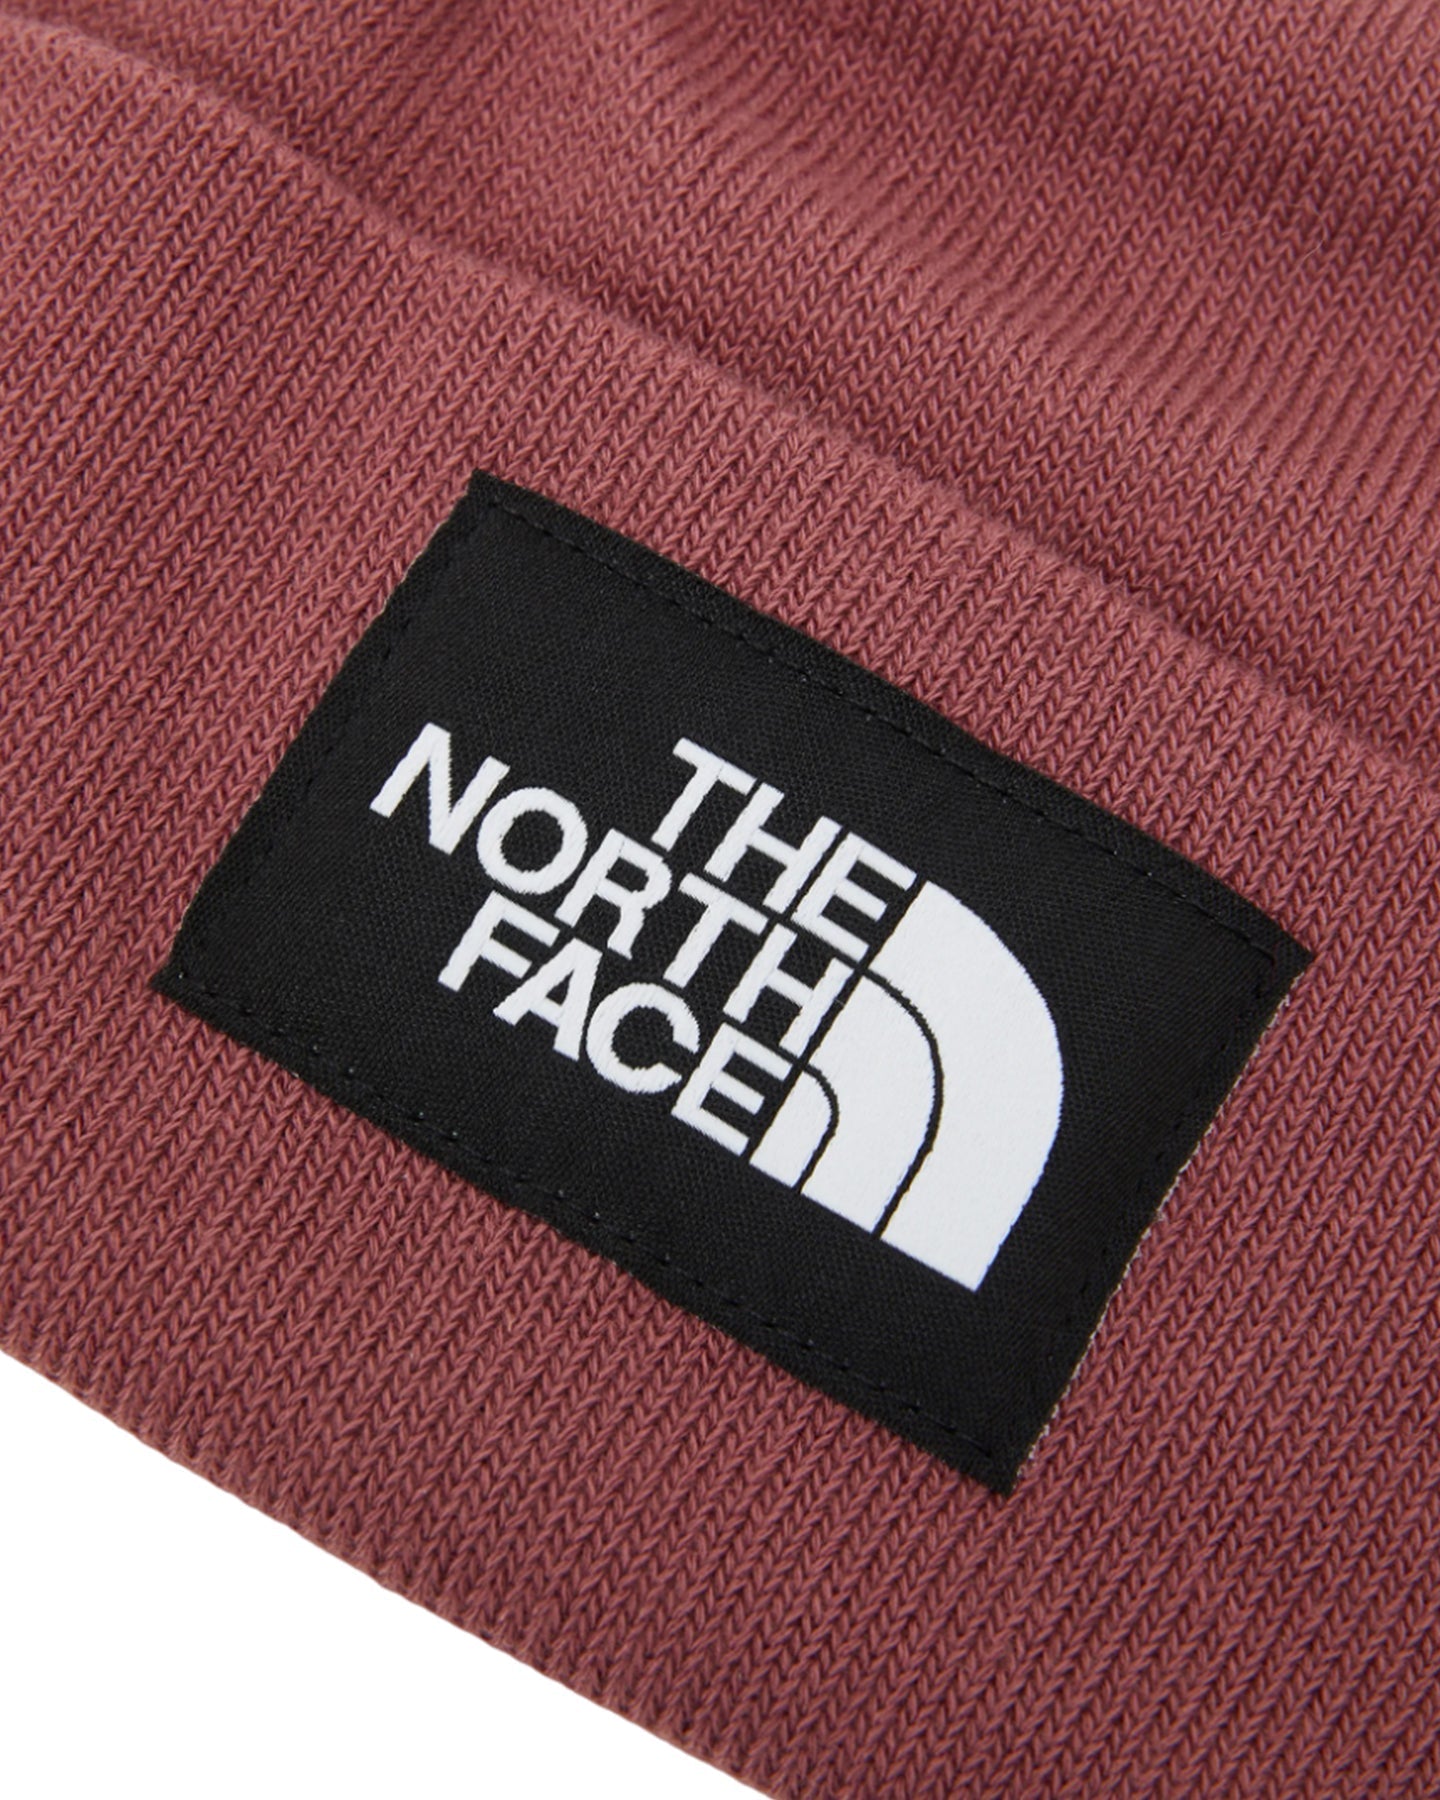 The North Face Dock Worker Recycled Beanie - Wild Ginger Beanies - SnowSkiersWarehouse